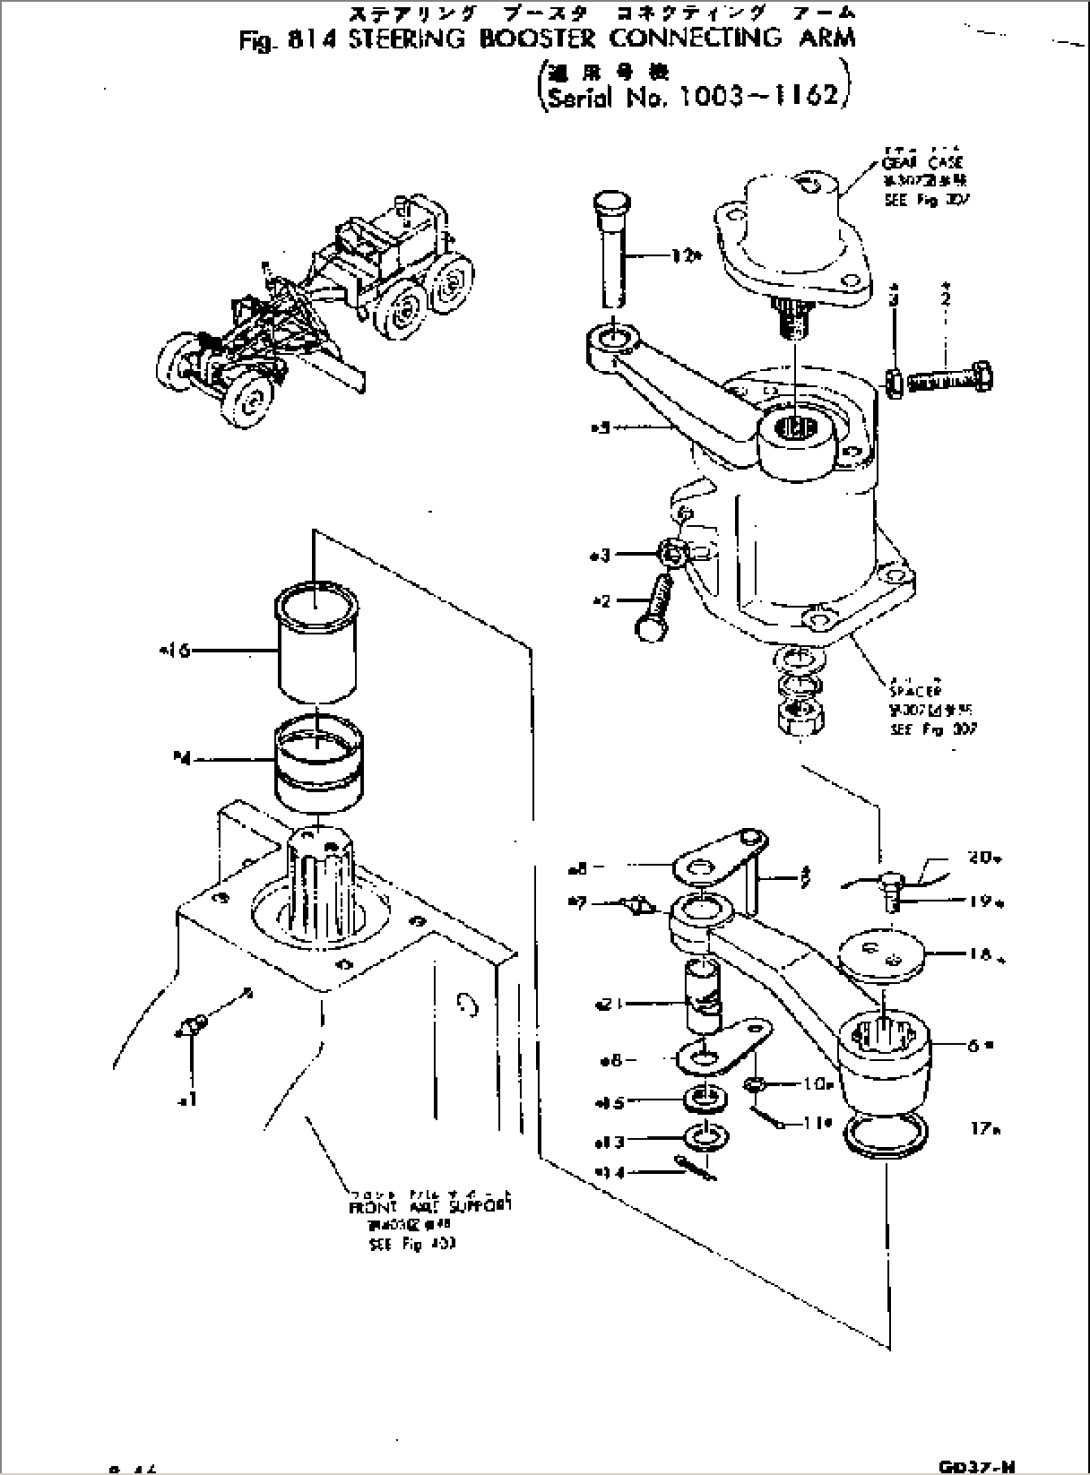 STEERING BOOSTER CONNECTING ARM(#1003-1162)